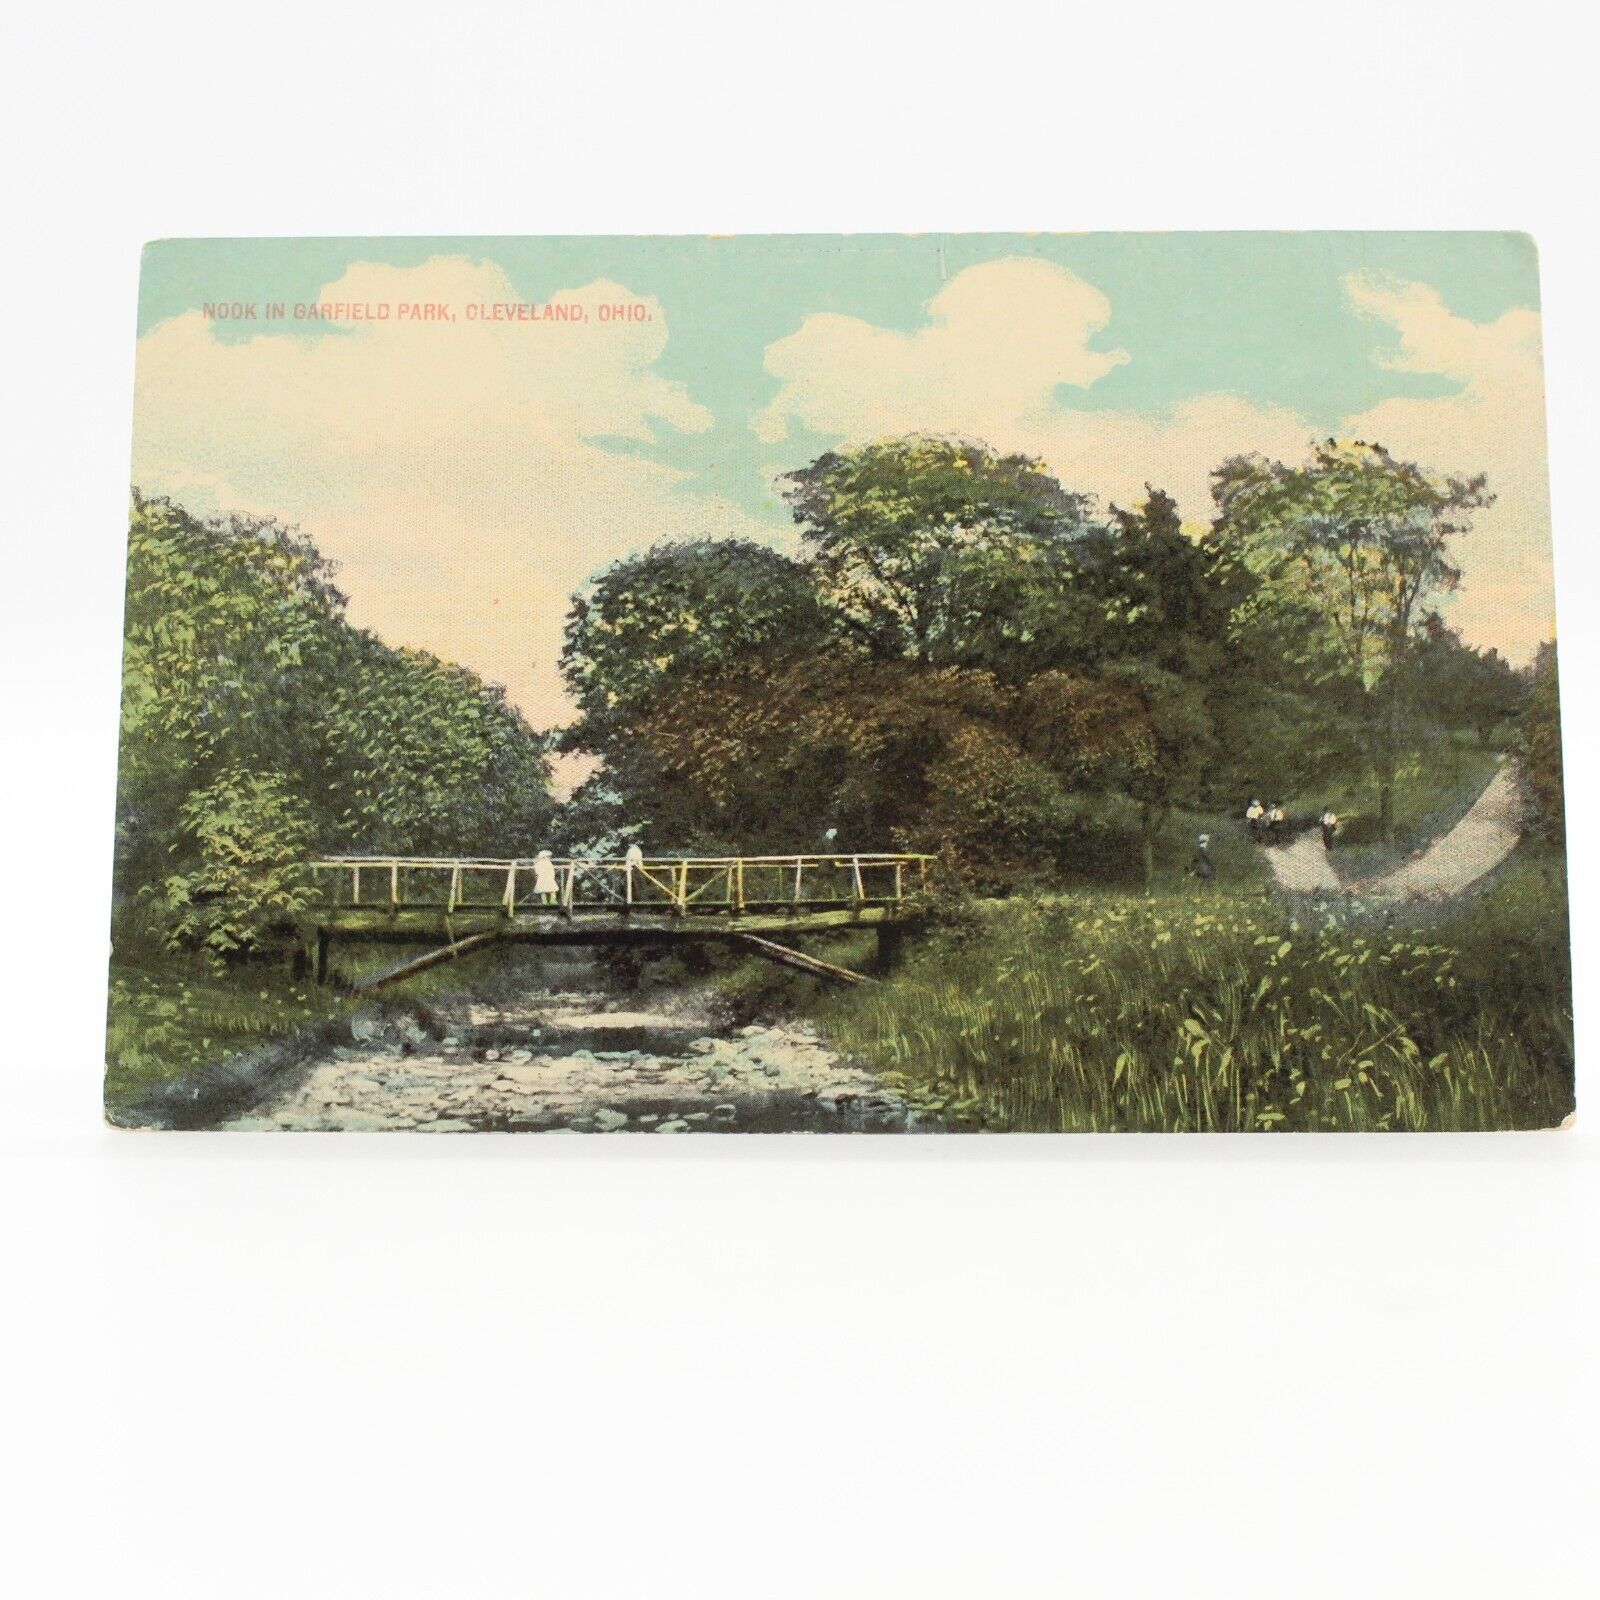 Cleveland Ohio Nook in Garfield Park Vintage Postcard OH Unposted